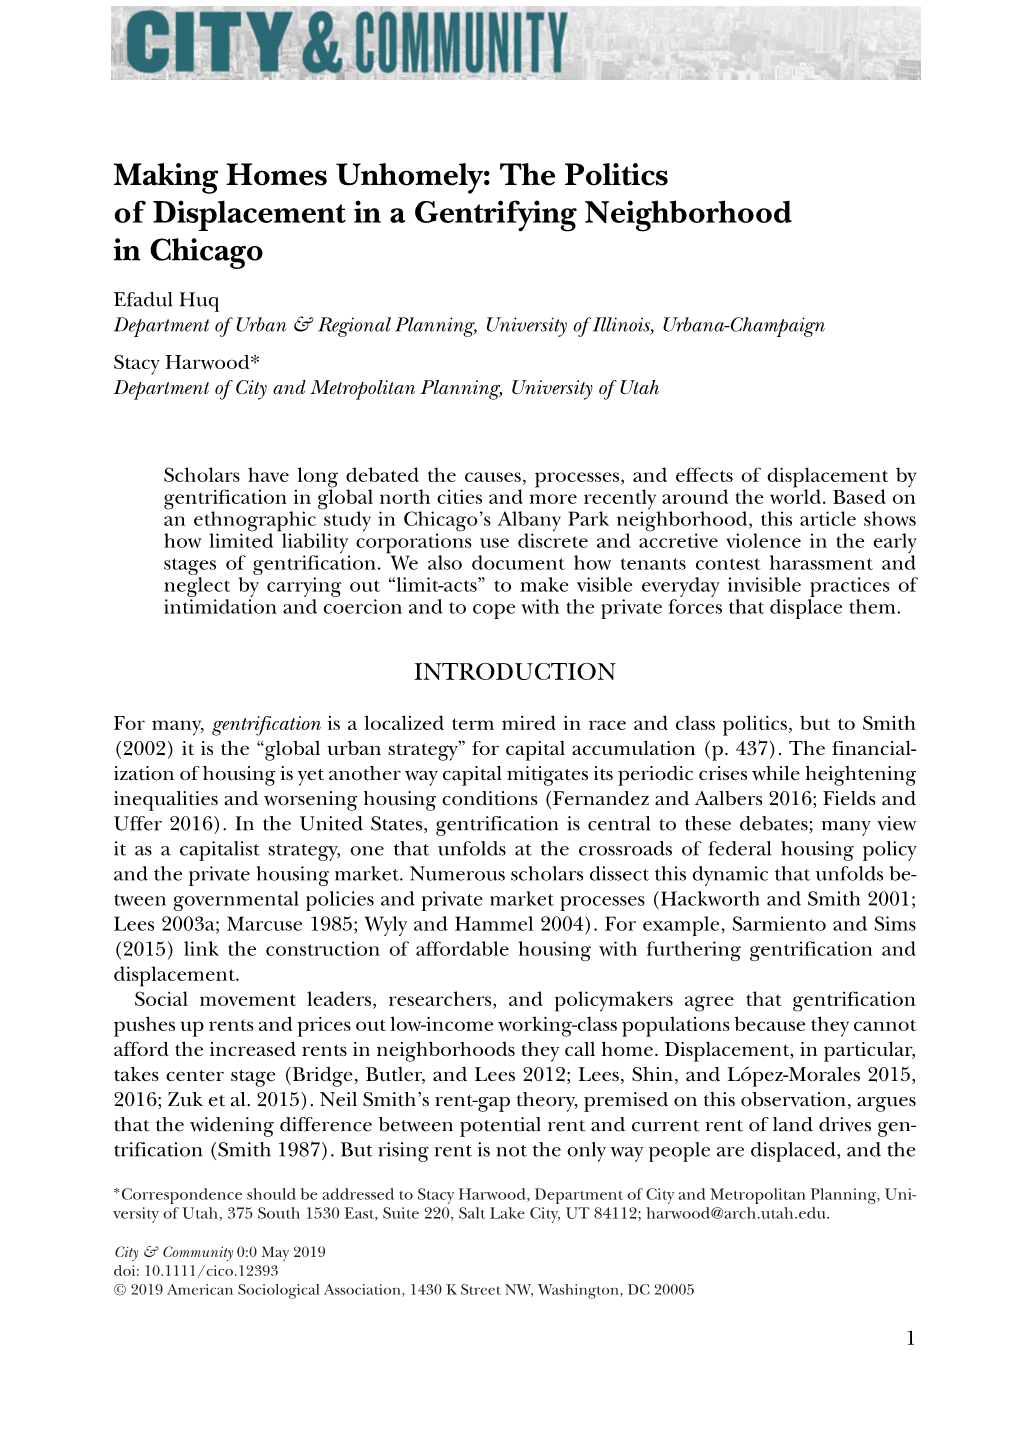 Making Homes Unhomely: the Politics of Displacement in a Gentrifying Neighborhood in Chicago